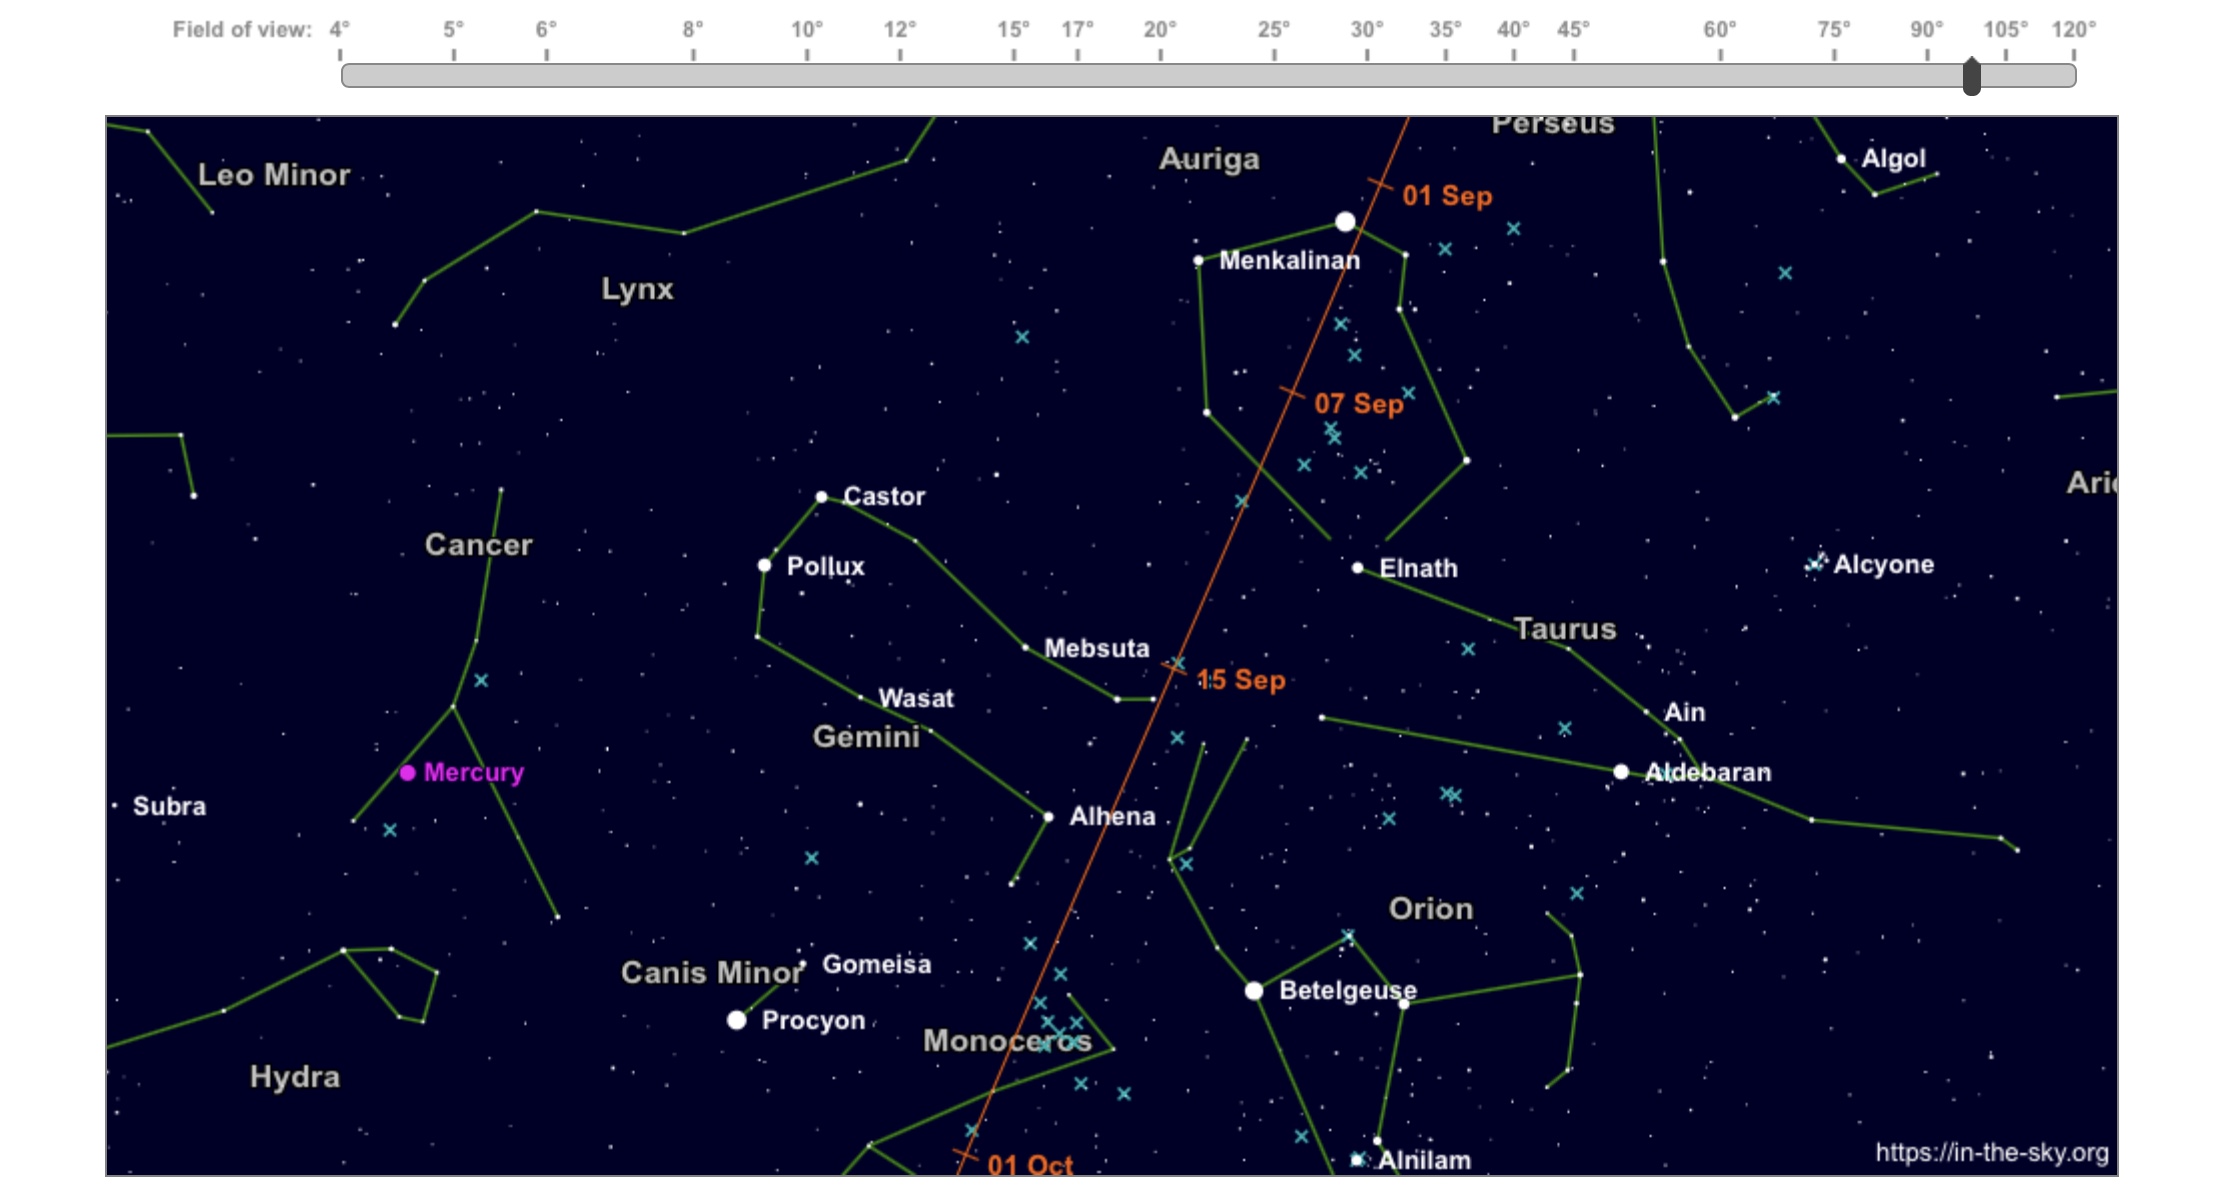 Path of Comet 21P for the month of September through a star map